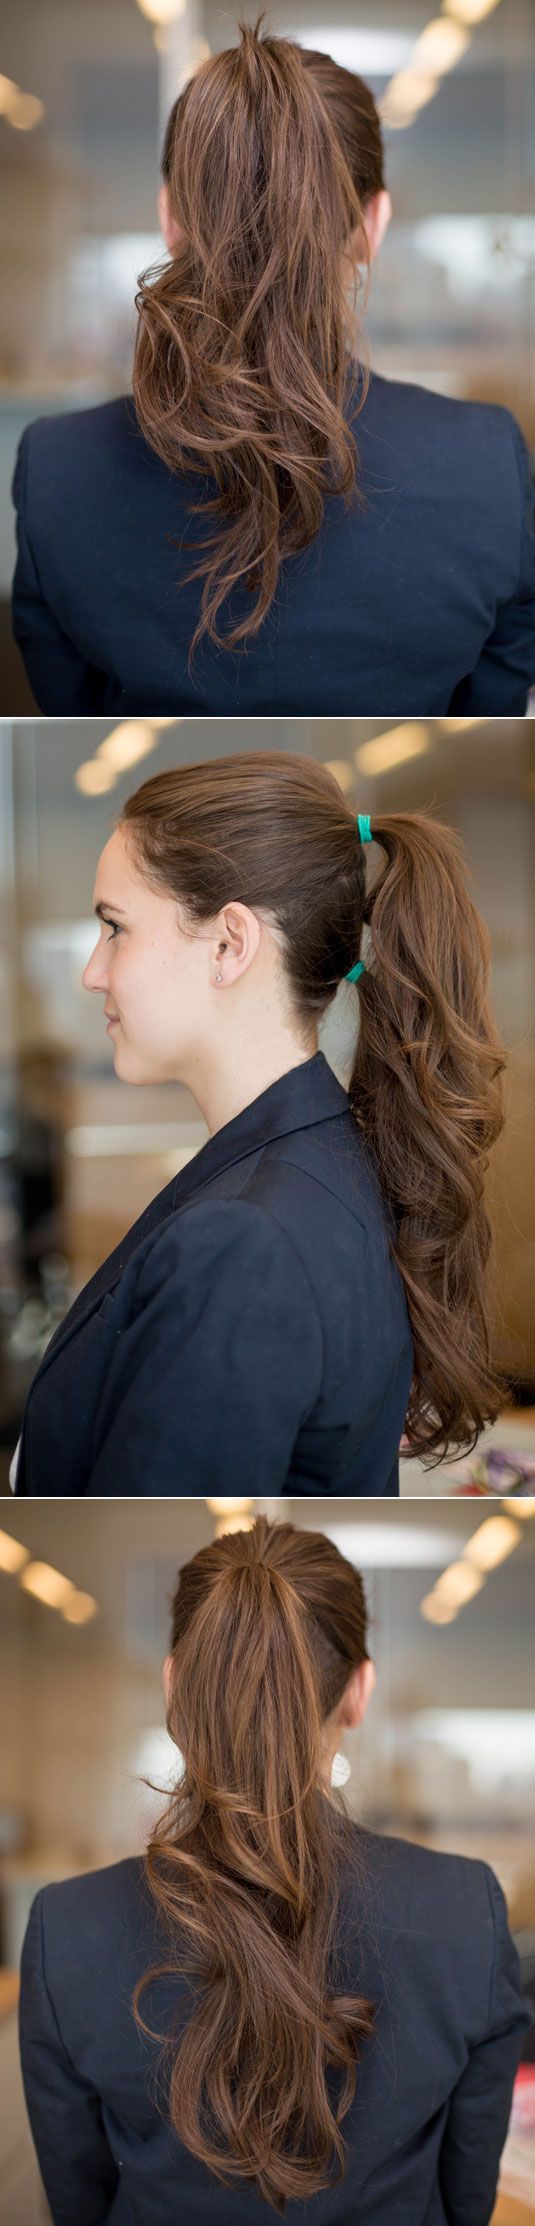 Hair, Hairstyle, Long hair, Beauty, Chin, Brown hair, Shoulder, Chignon, Blond, Ponytail, 